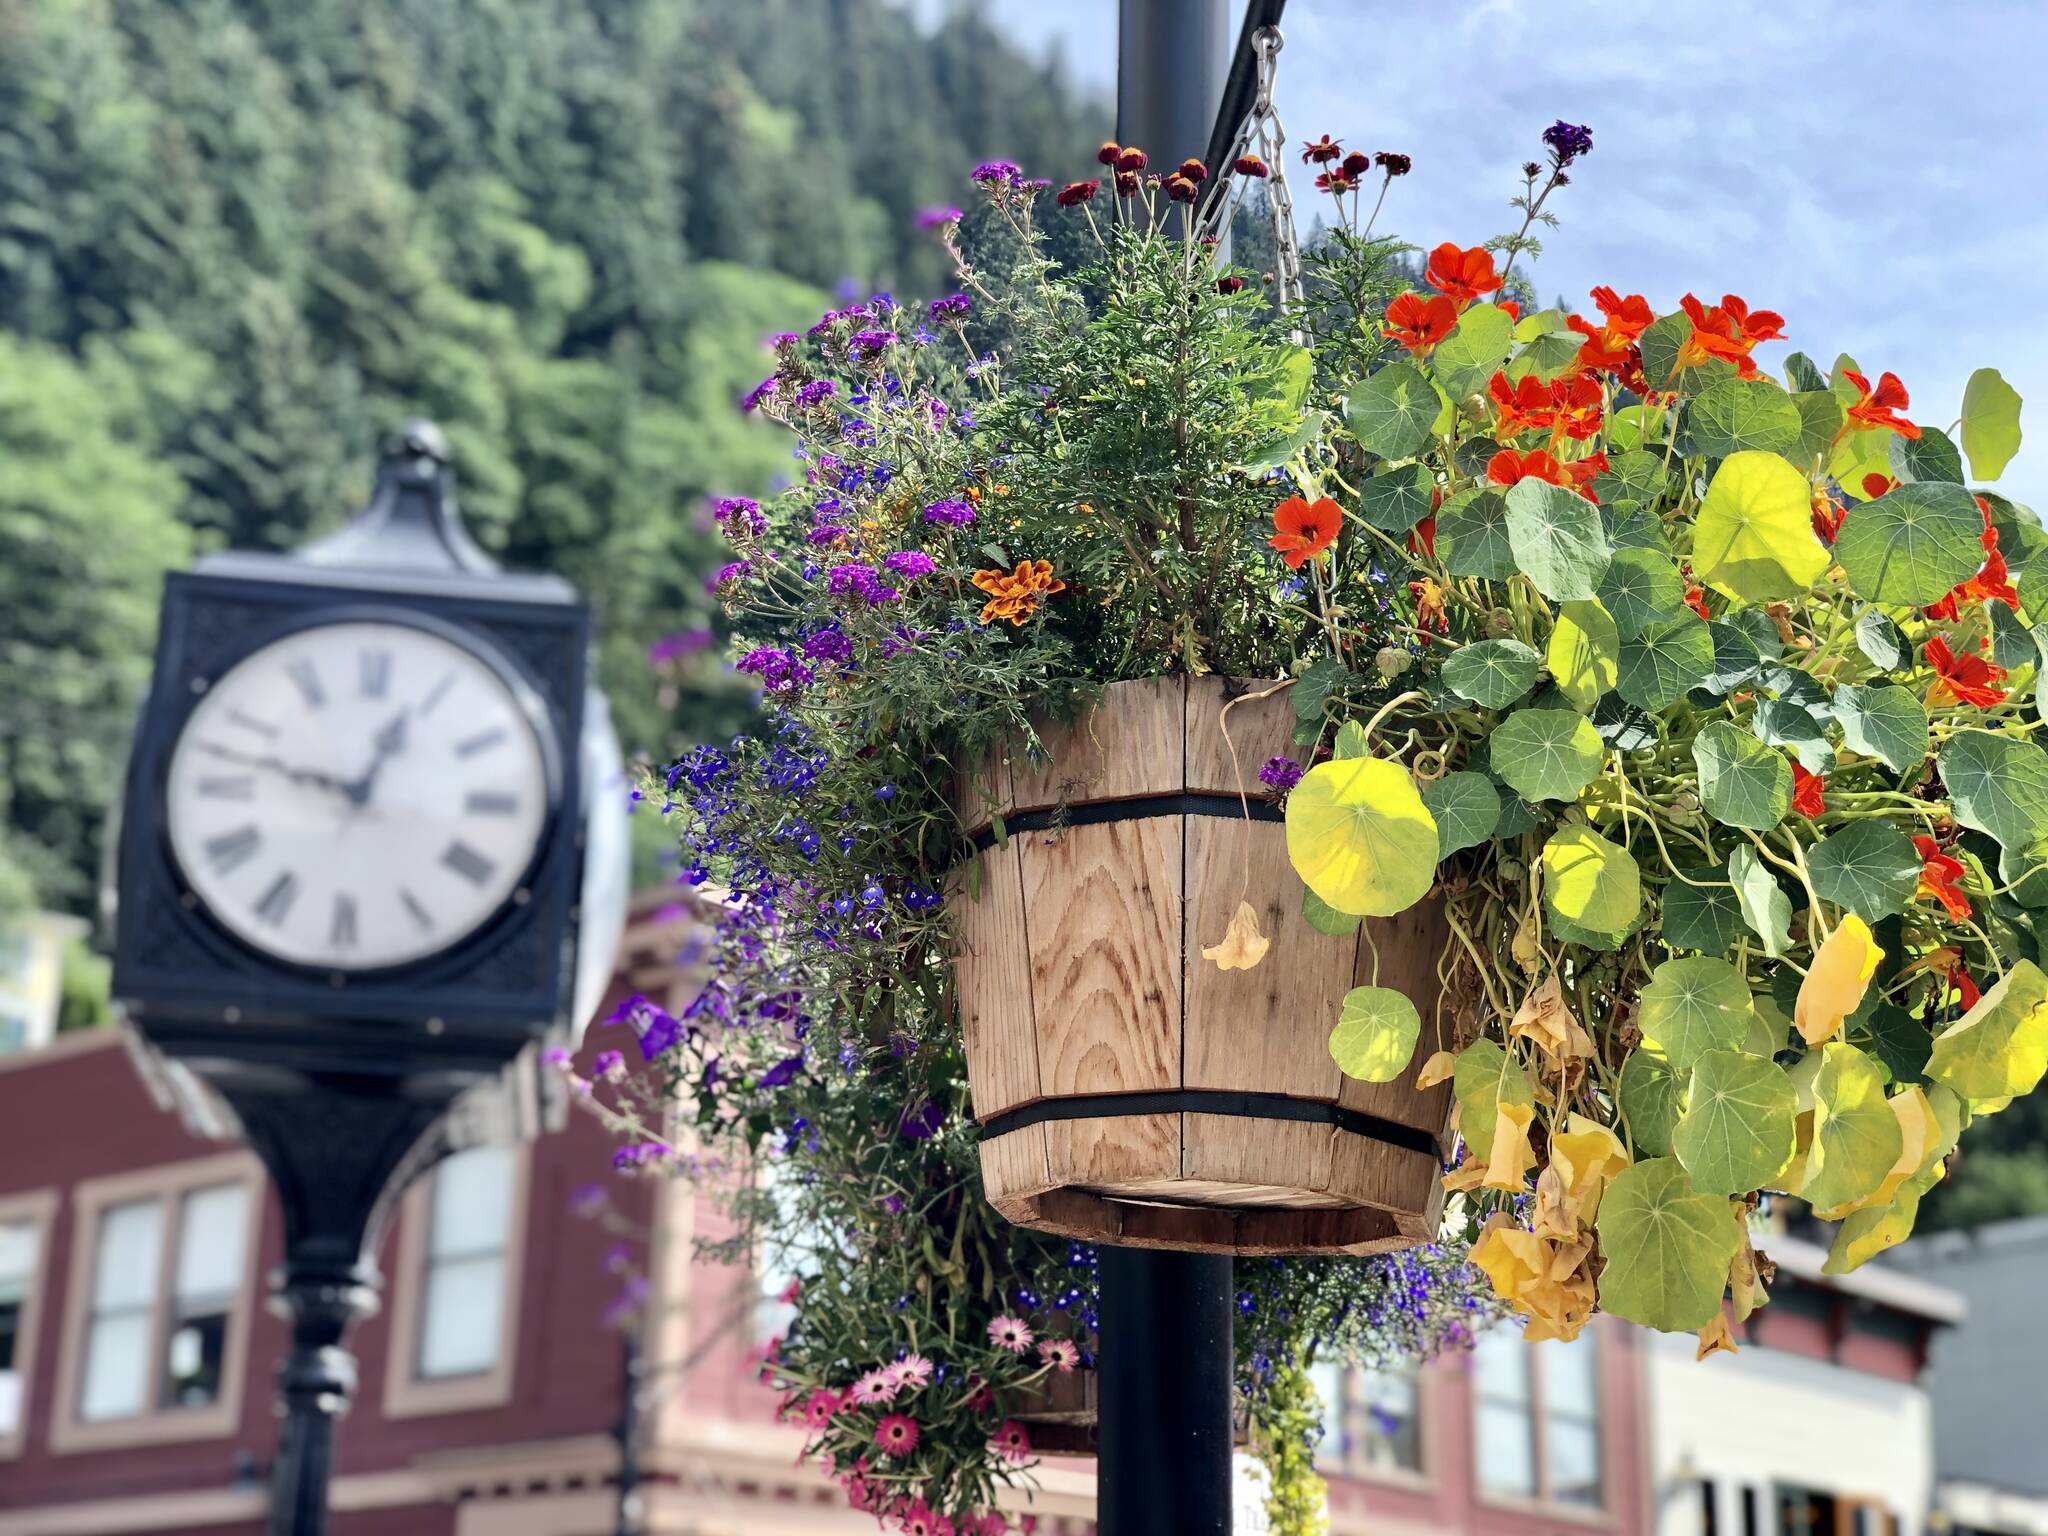 Flowers from the city’s Adopt-A-Flower program hang downtown. (City and Borough of Juneau photo)